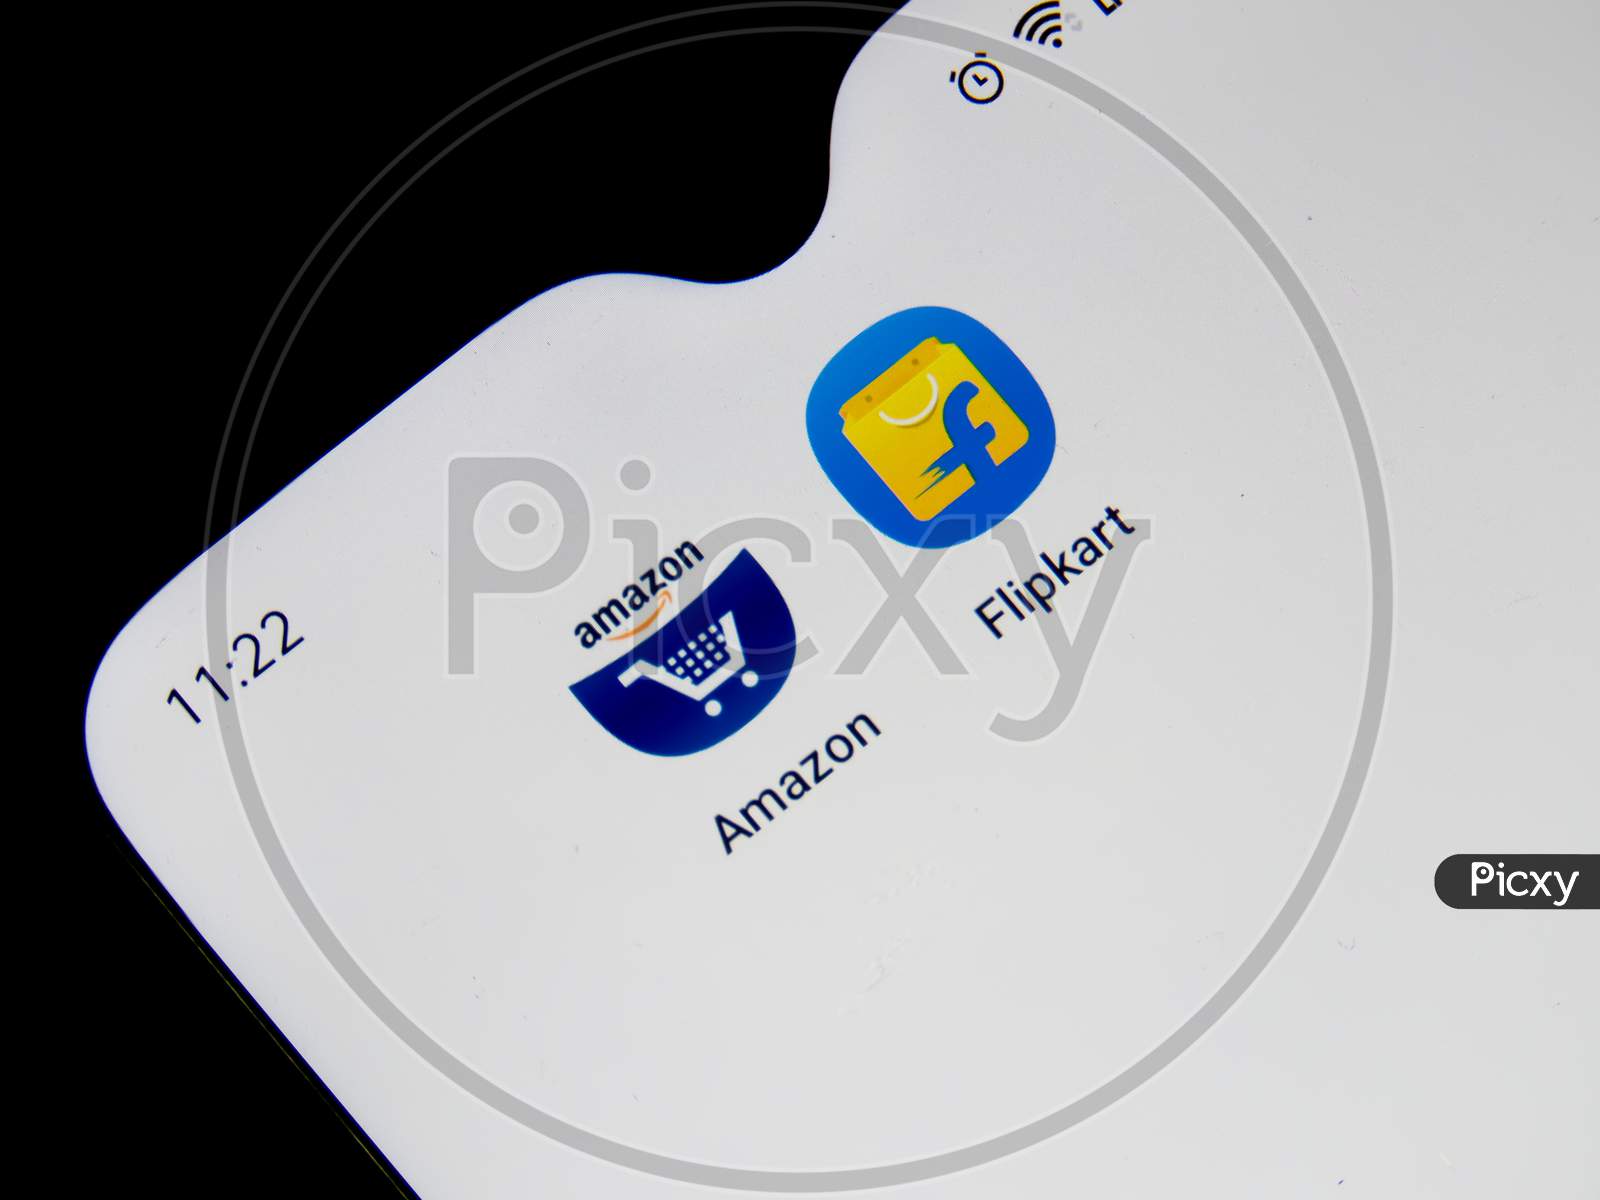 Online Shopping Apps Amazon And Flipkart On The Mobile Screen.